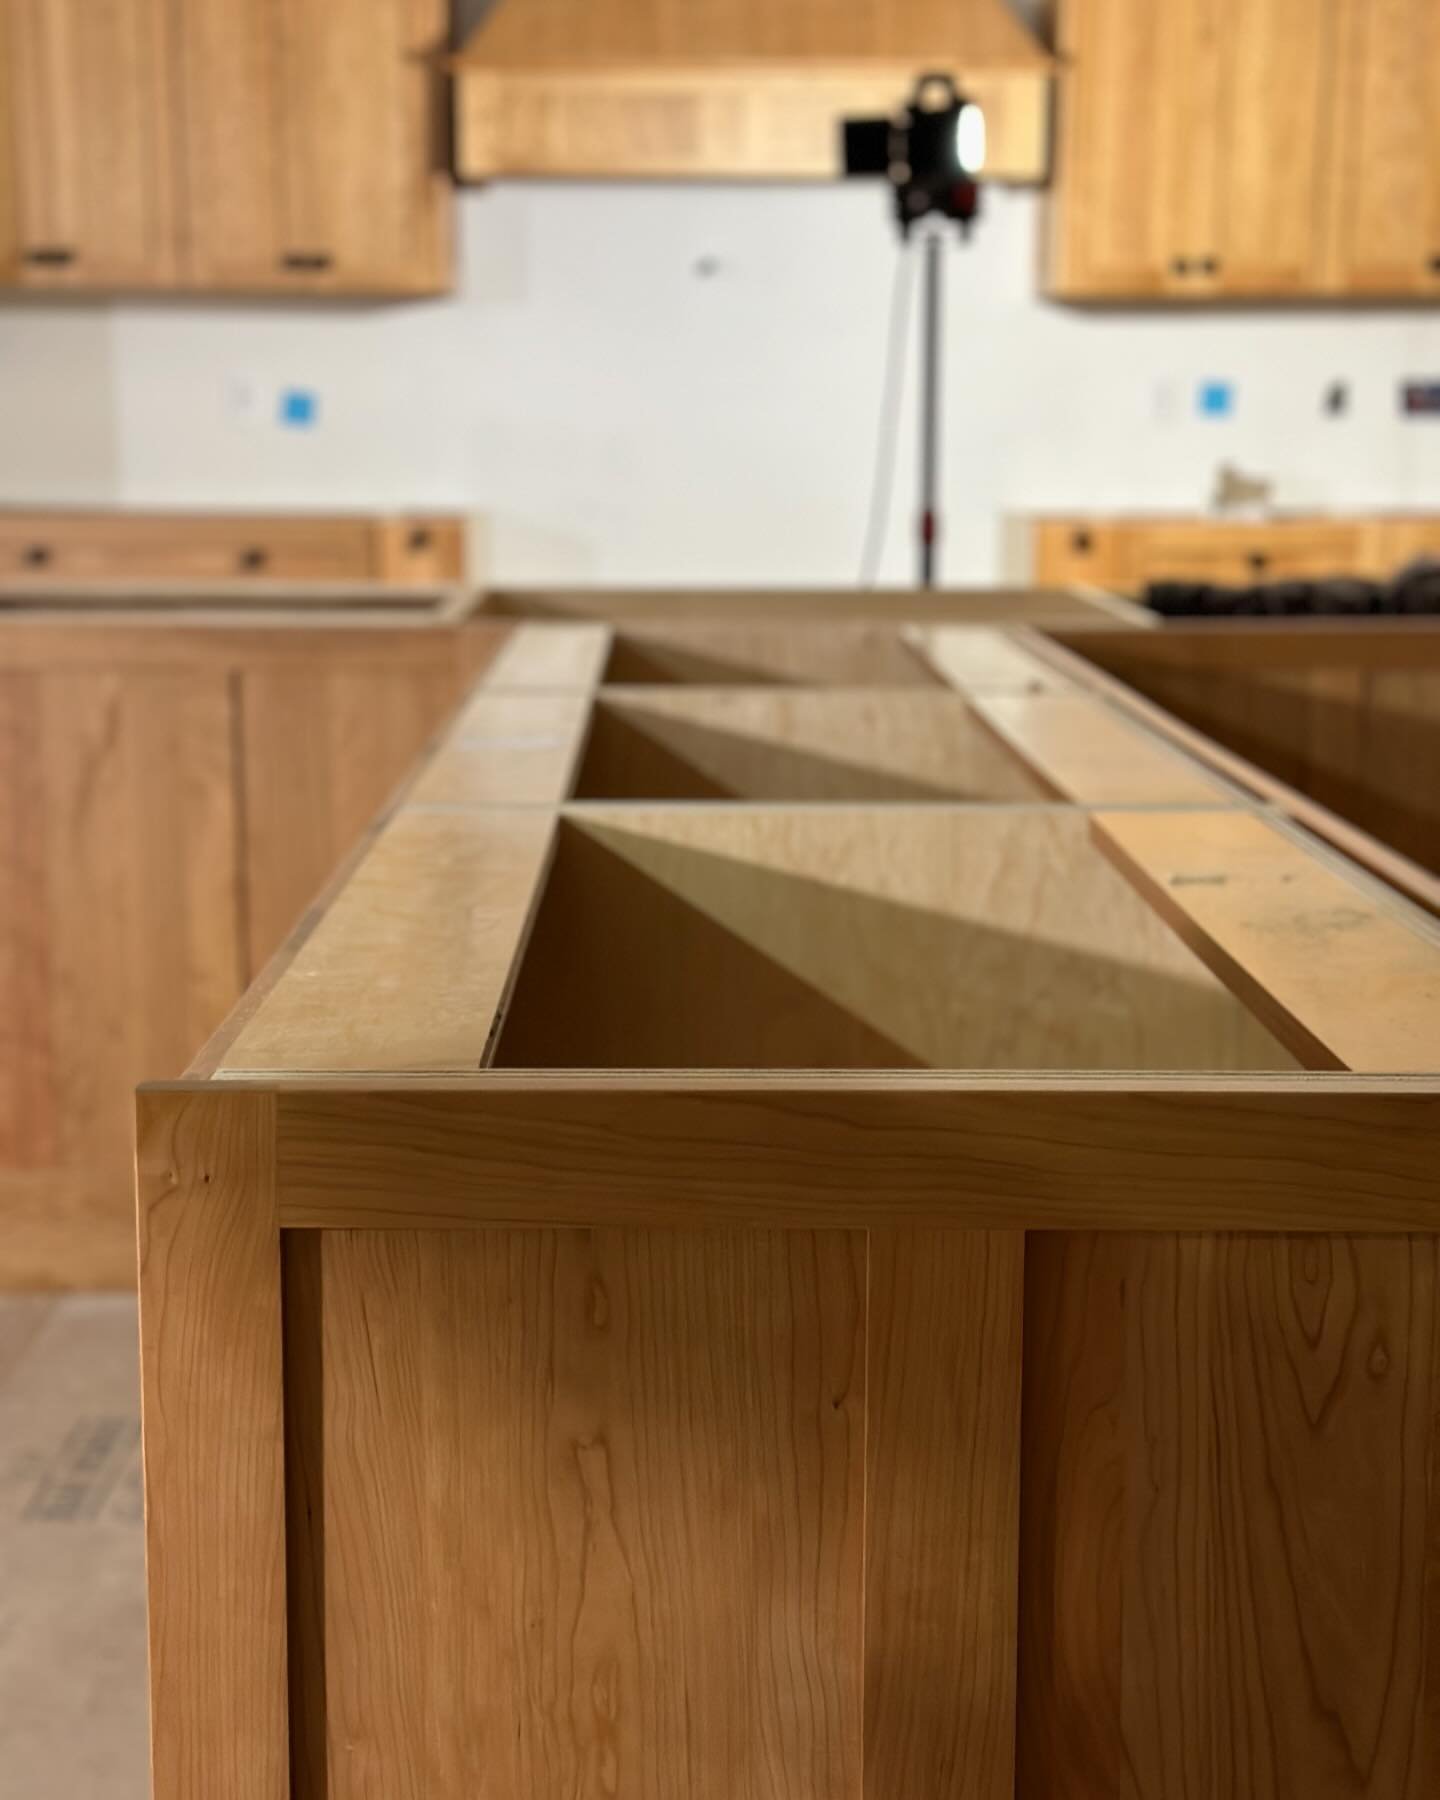 Work in progress on this cherry craftsman style kitchen with the biggest island we&rsquo;ve ever built! 
#customcabinetry #customcabinets #kitchendesign #customkitchens